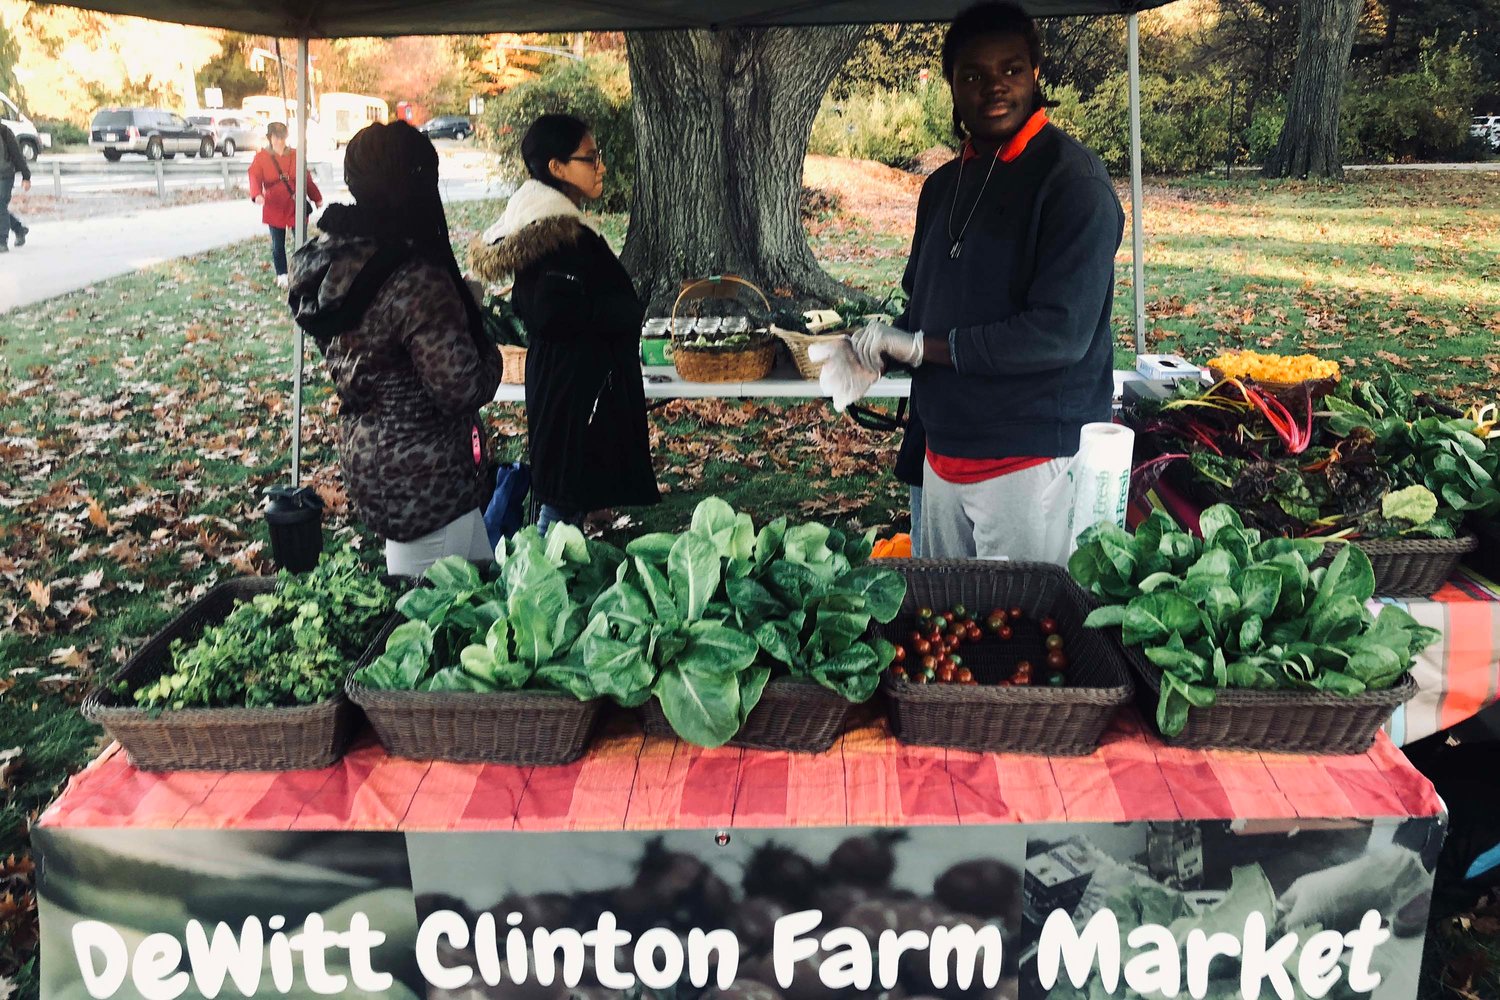 Teens for Food Justice has its own farm market on the school campus. The produce was grown using hydroponics in DeWitt Clinton High School.